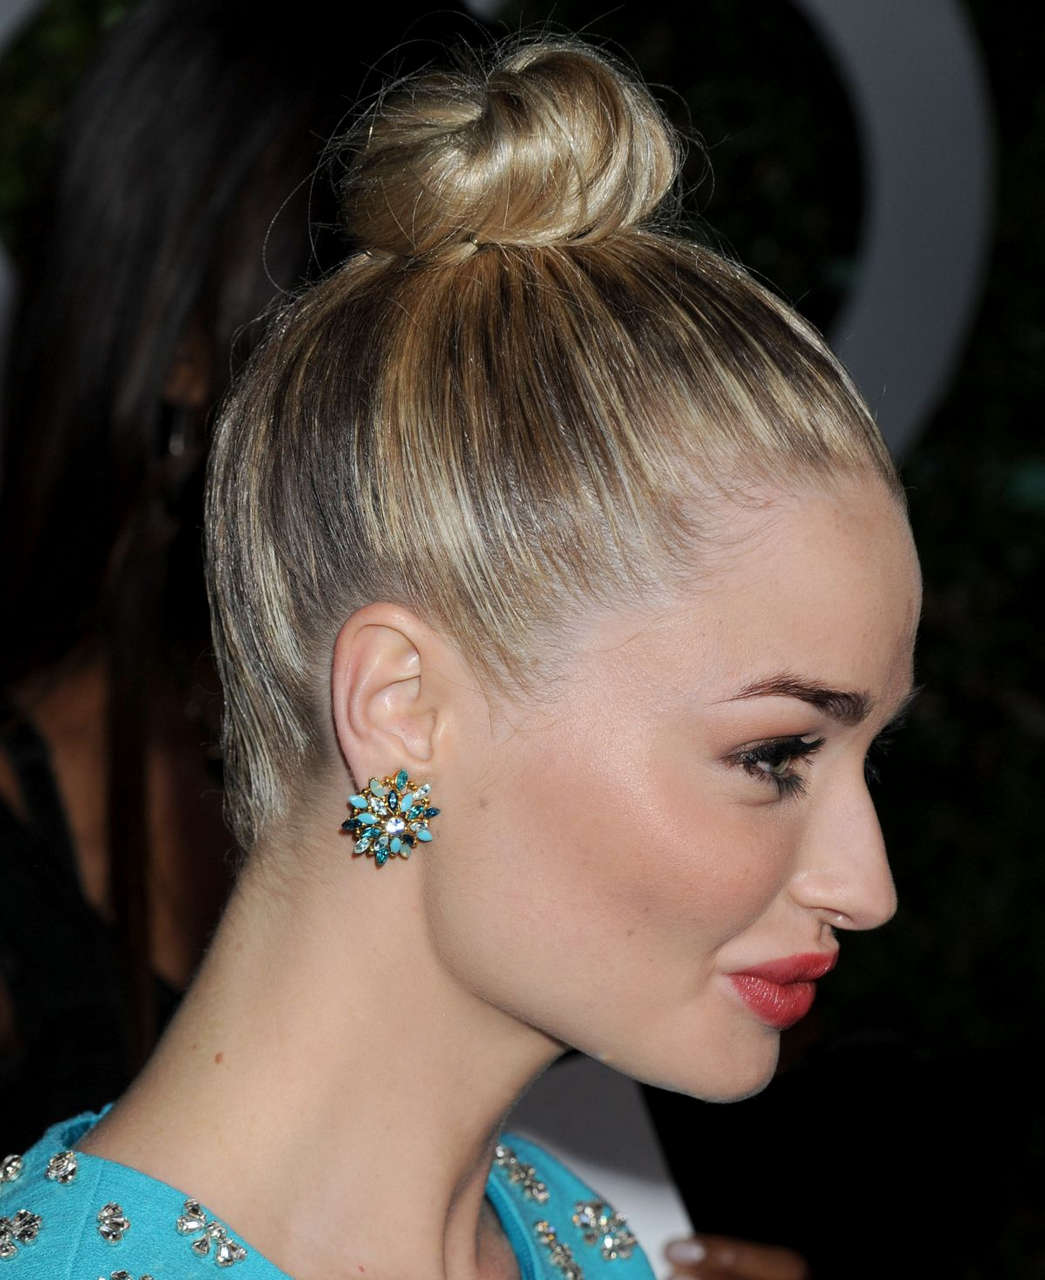 Emma Rigby Michael Kors Launch Claiborne Swanson Franks Young Hollywood